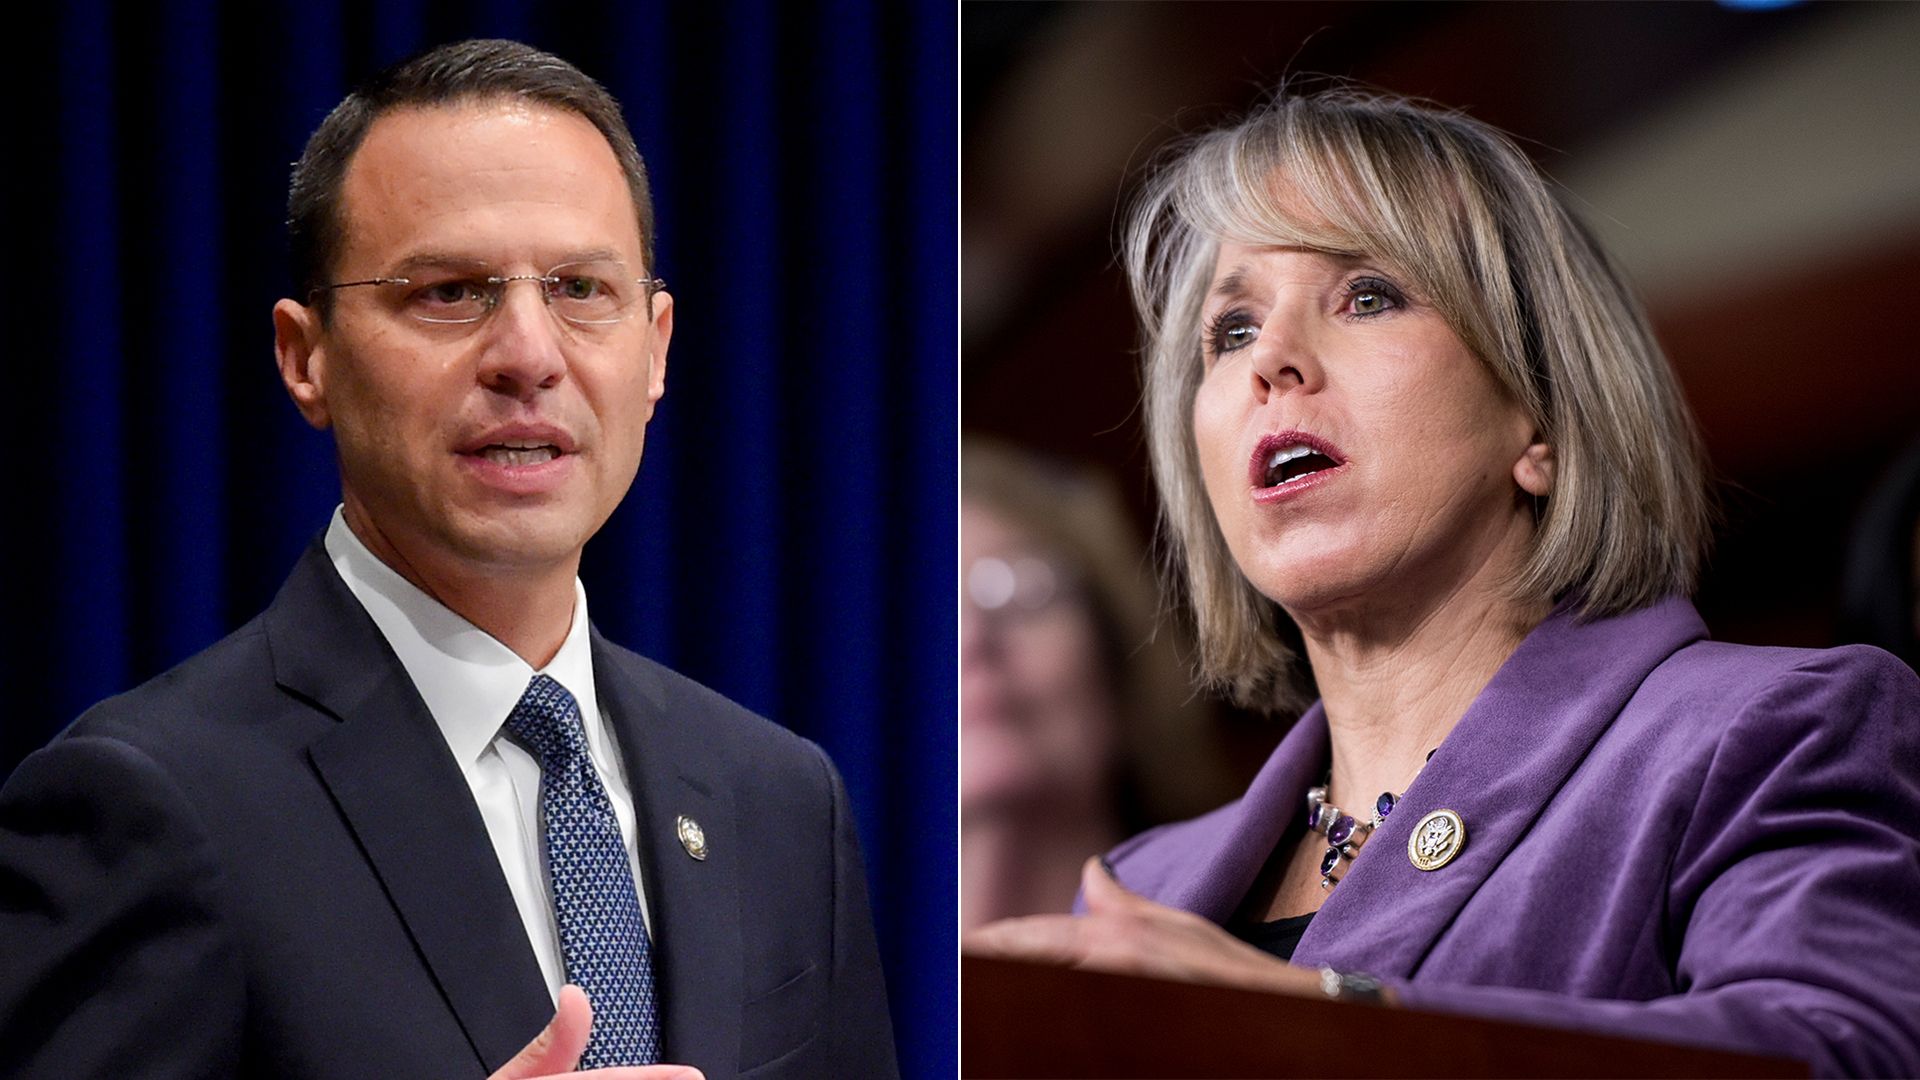 Pennsylvania Attorney General Joel Shapiro and New Mexico Gov. Michelle Lujan Grisham are seen side by side.